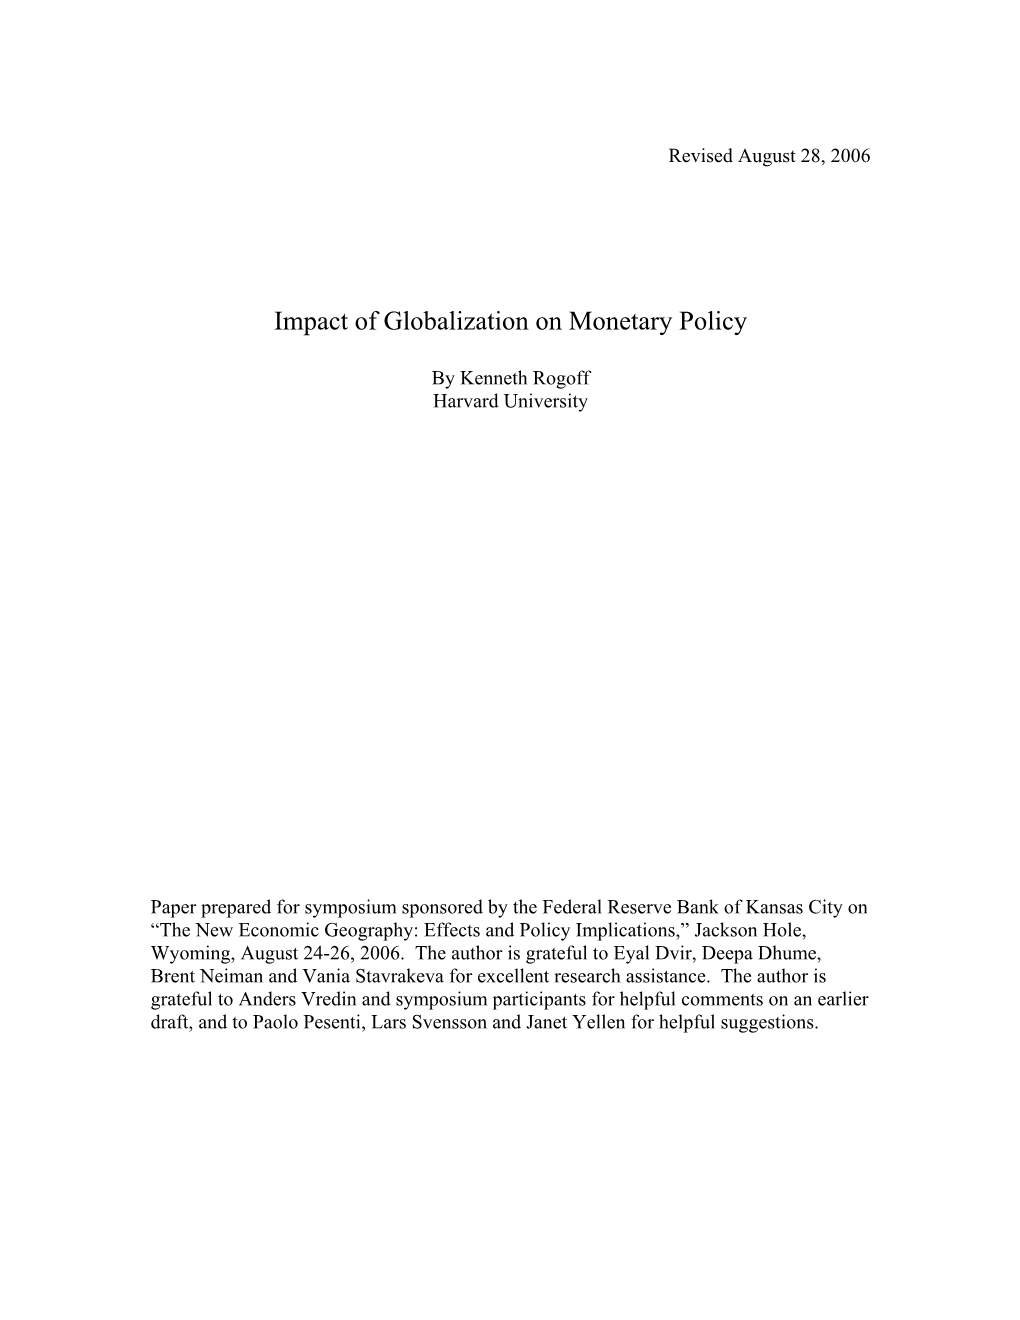 Impact of Globalization on Monetary Policy